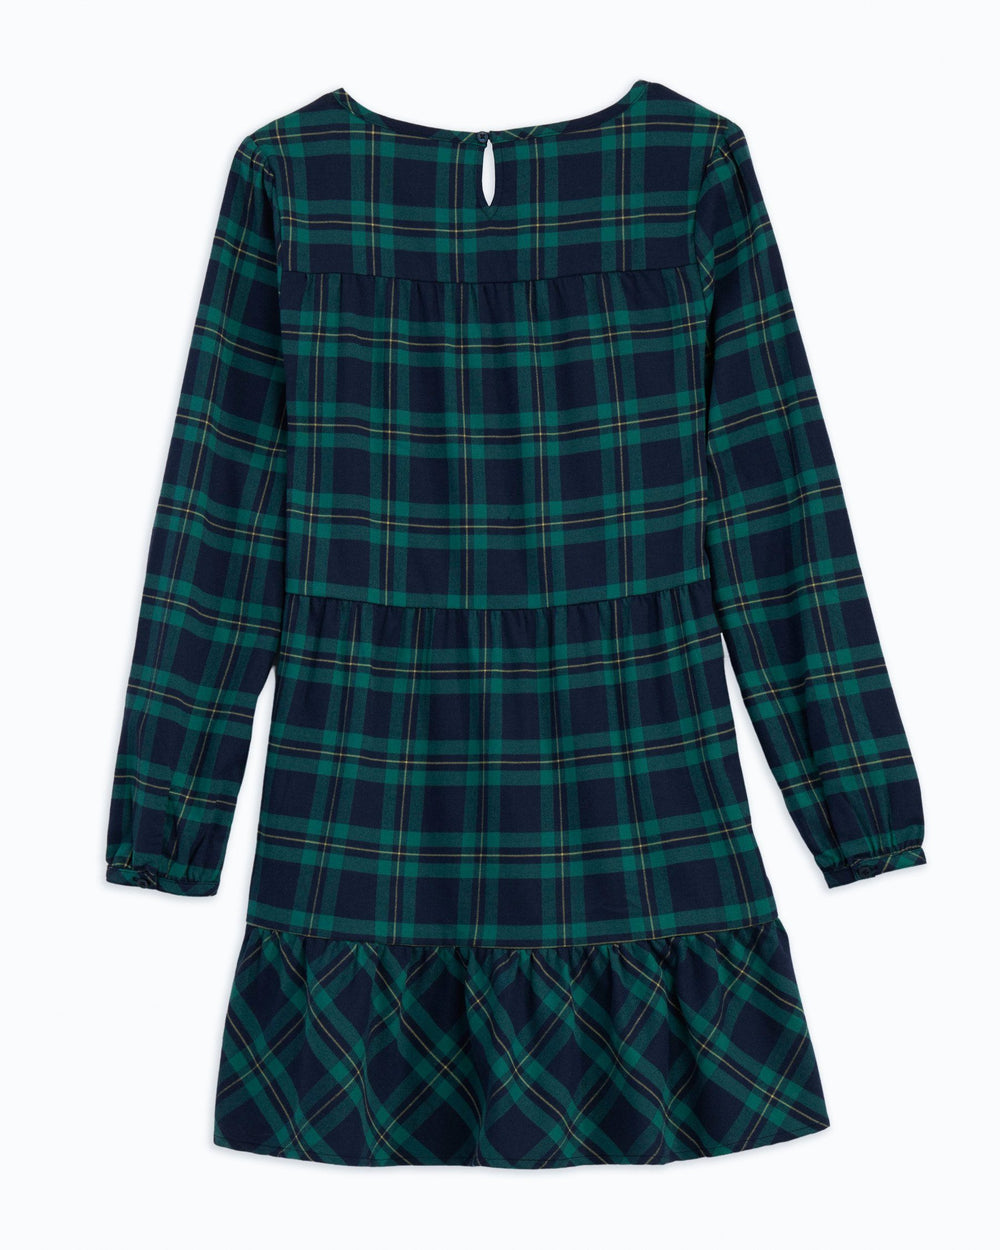 The flat back of the Women's Nadia Flannel Intercoastal Dress by Southern Tide - Evening Emerald